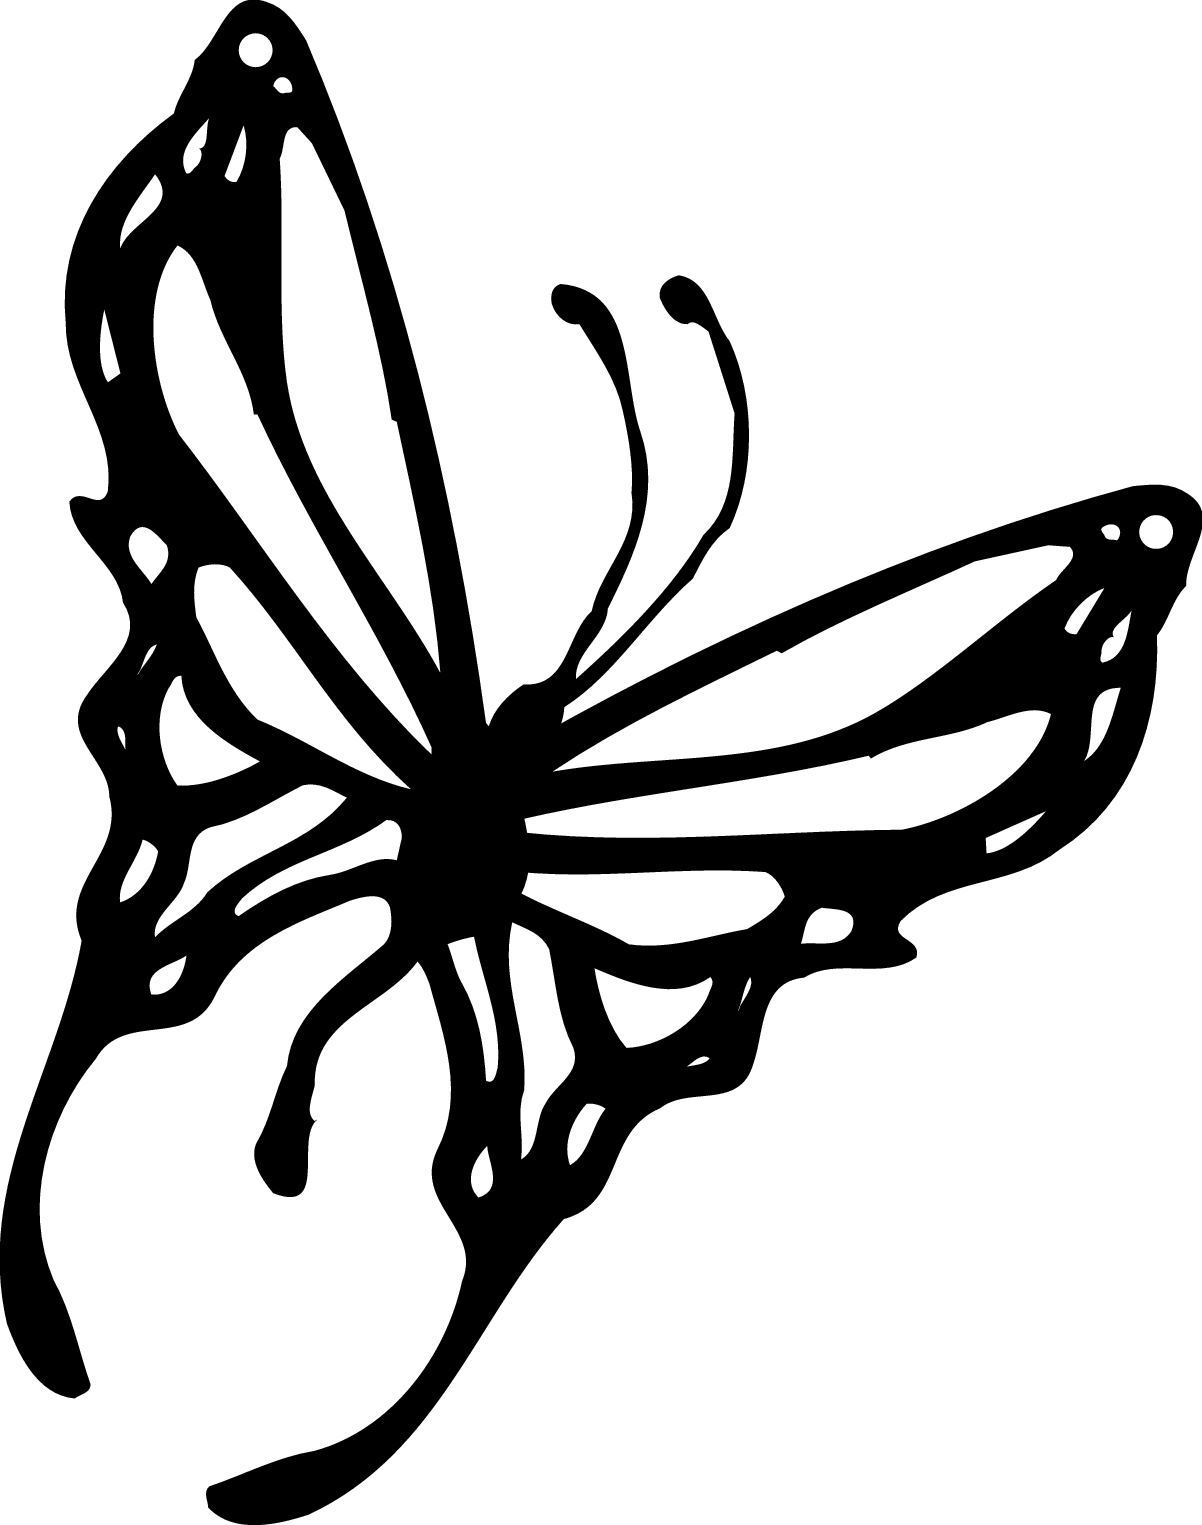 Butterfly black and white . - Black And White Butterfly Clipart